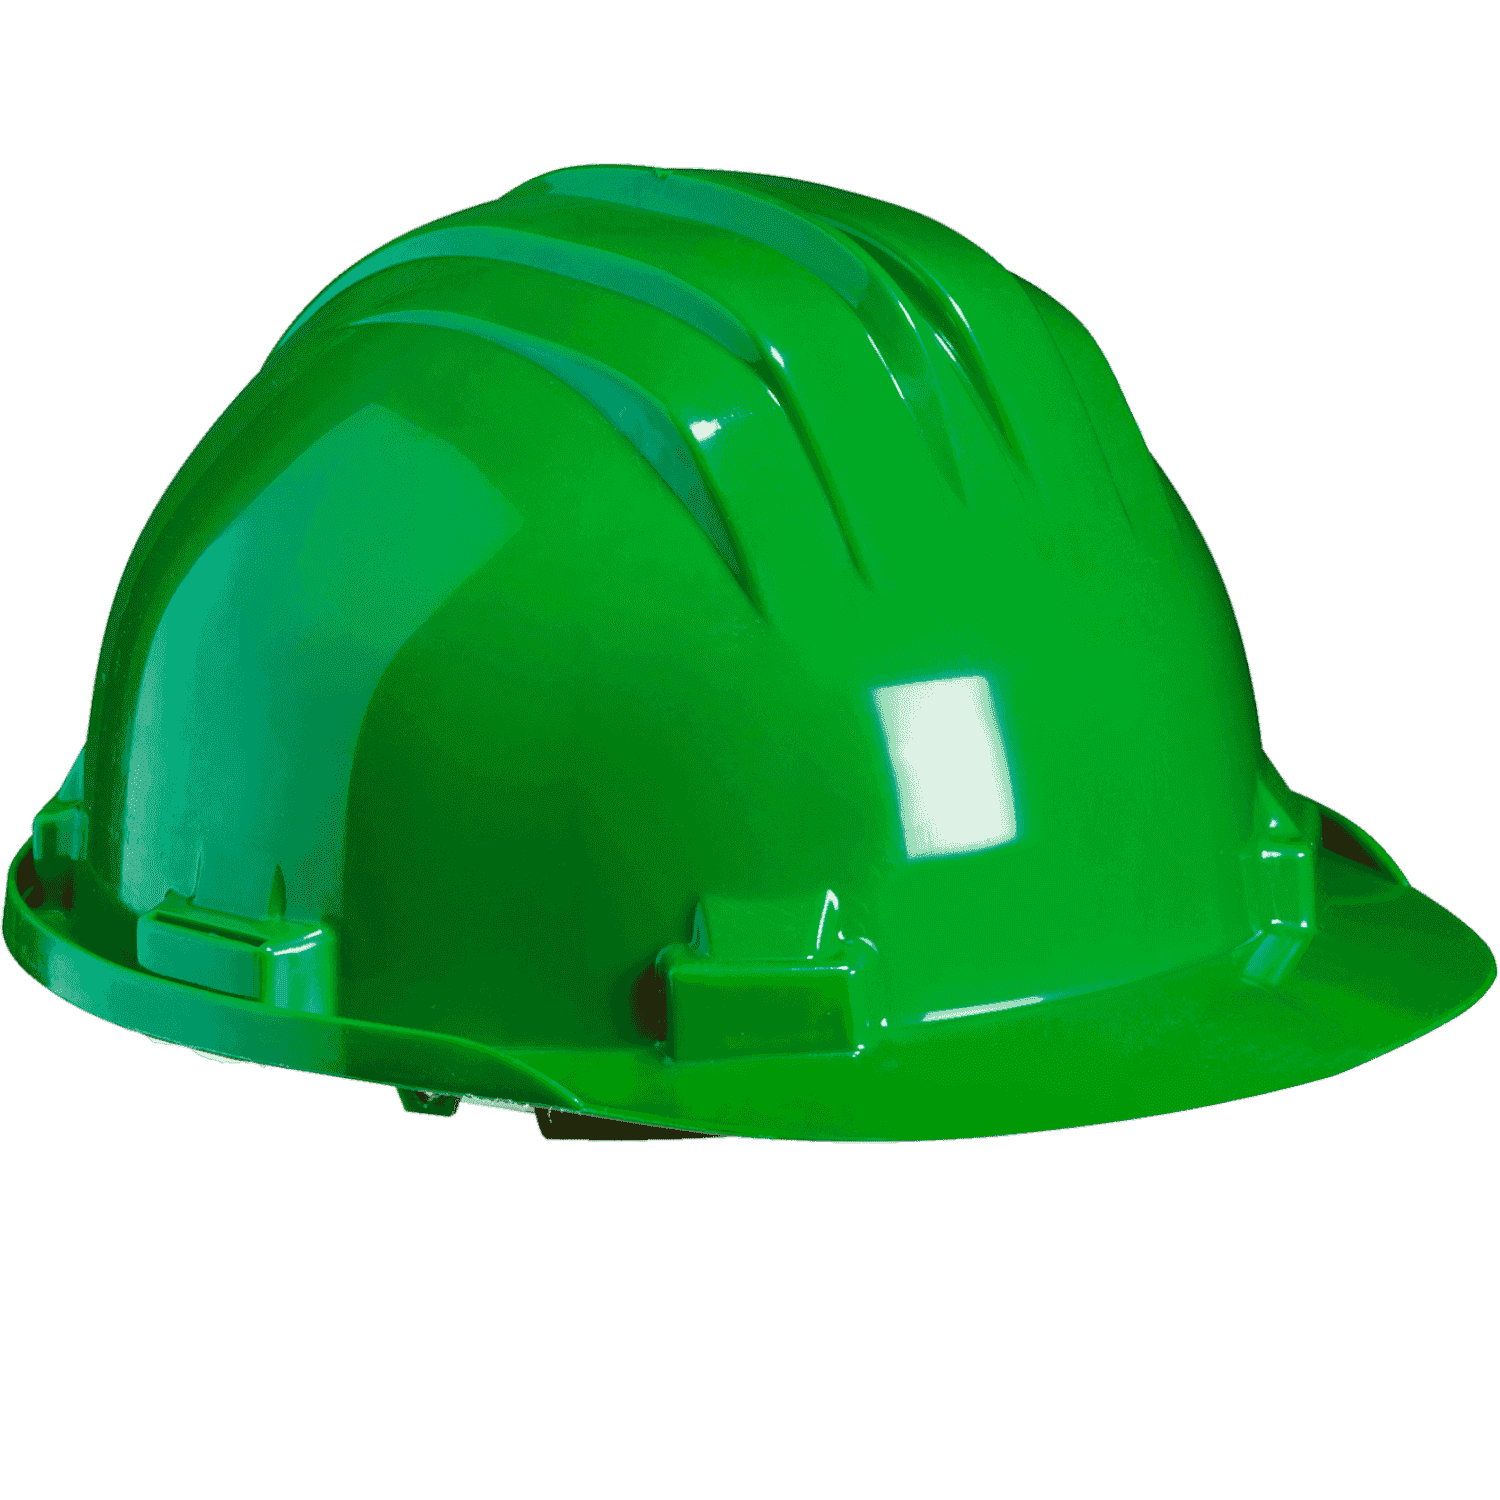 Climax 5-RG Toothed Wheel Safety Helmet Green